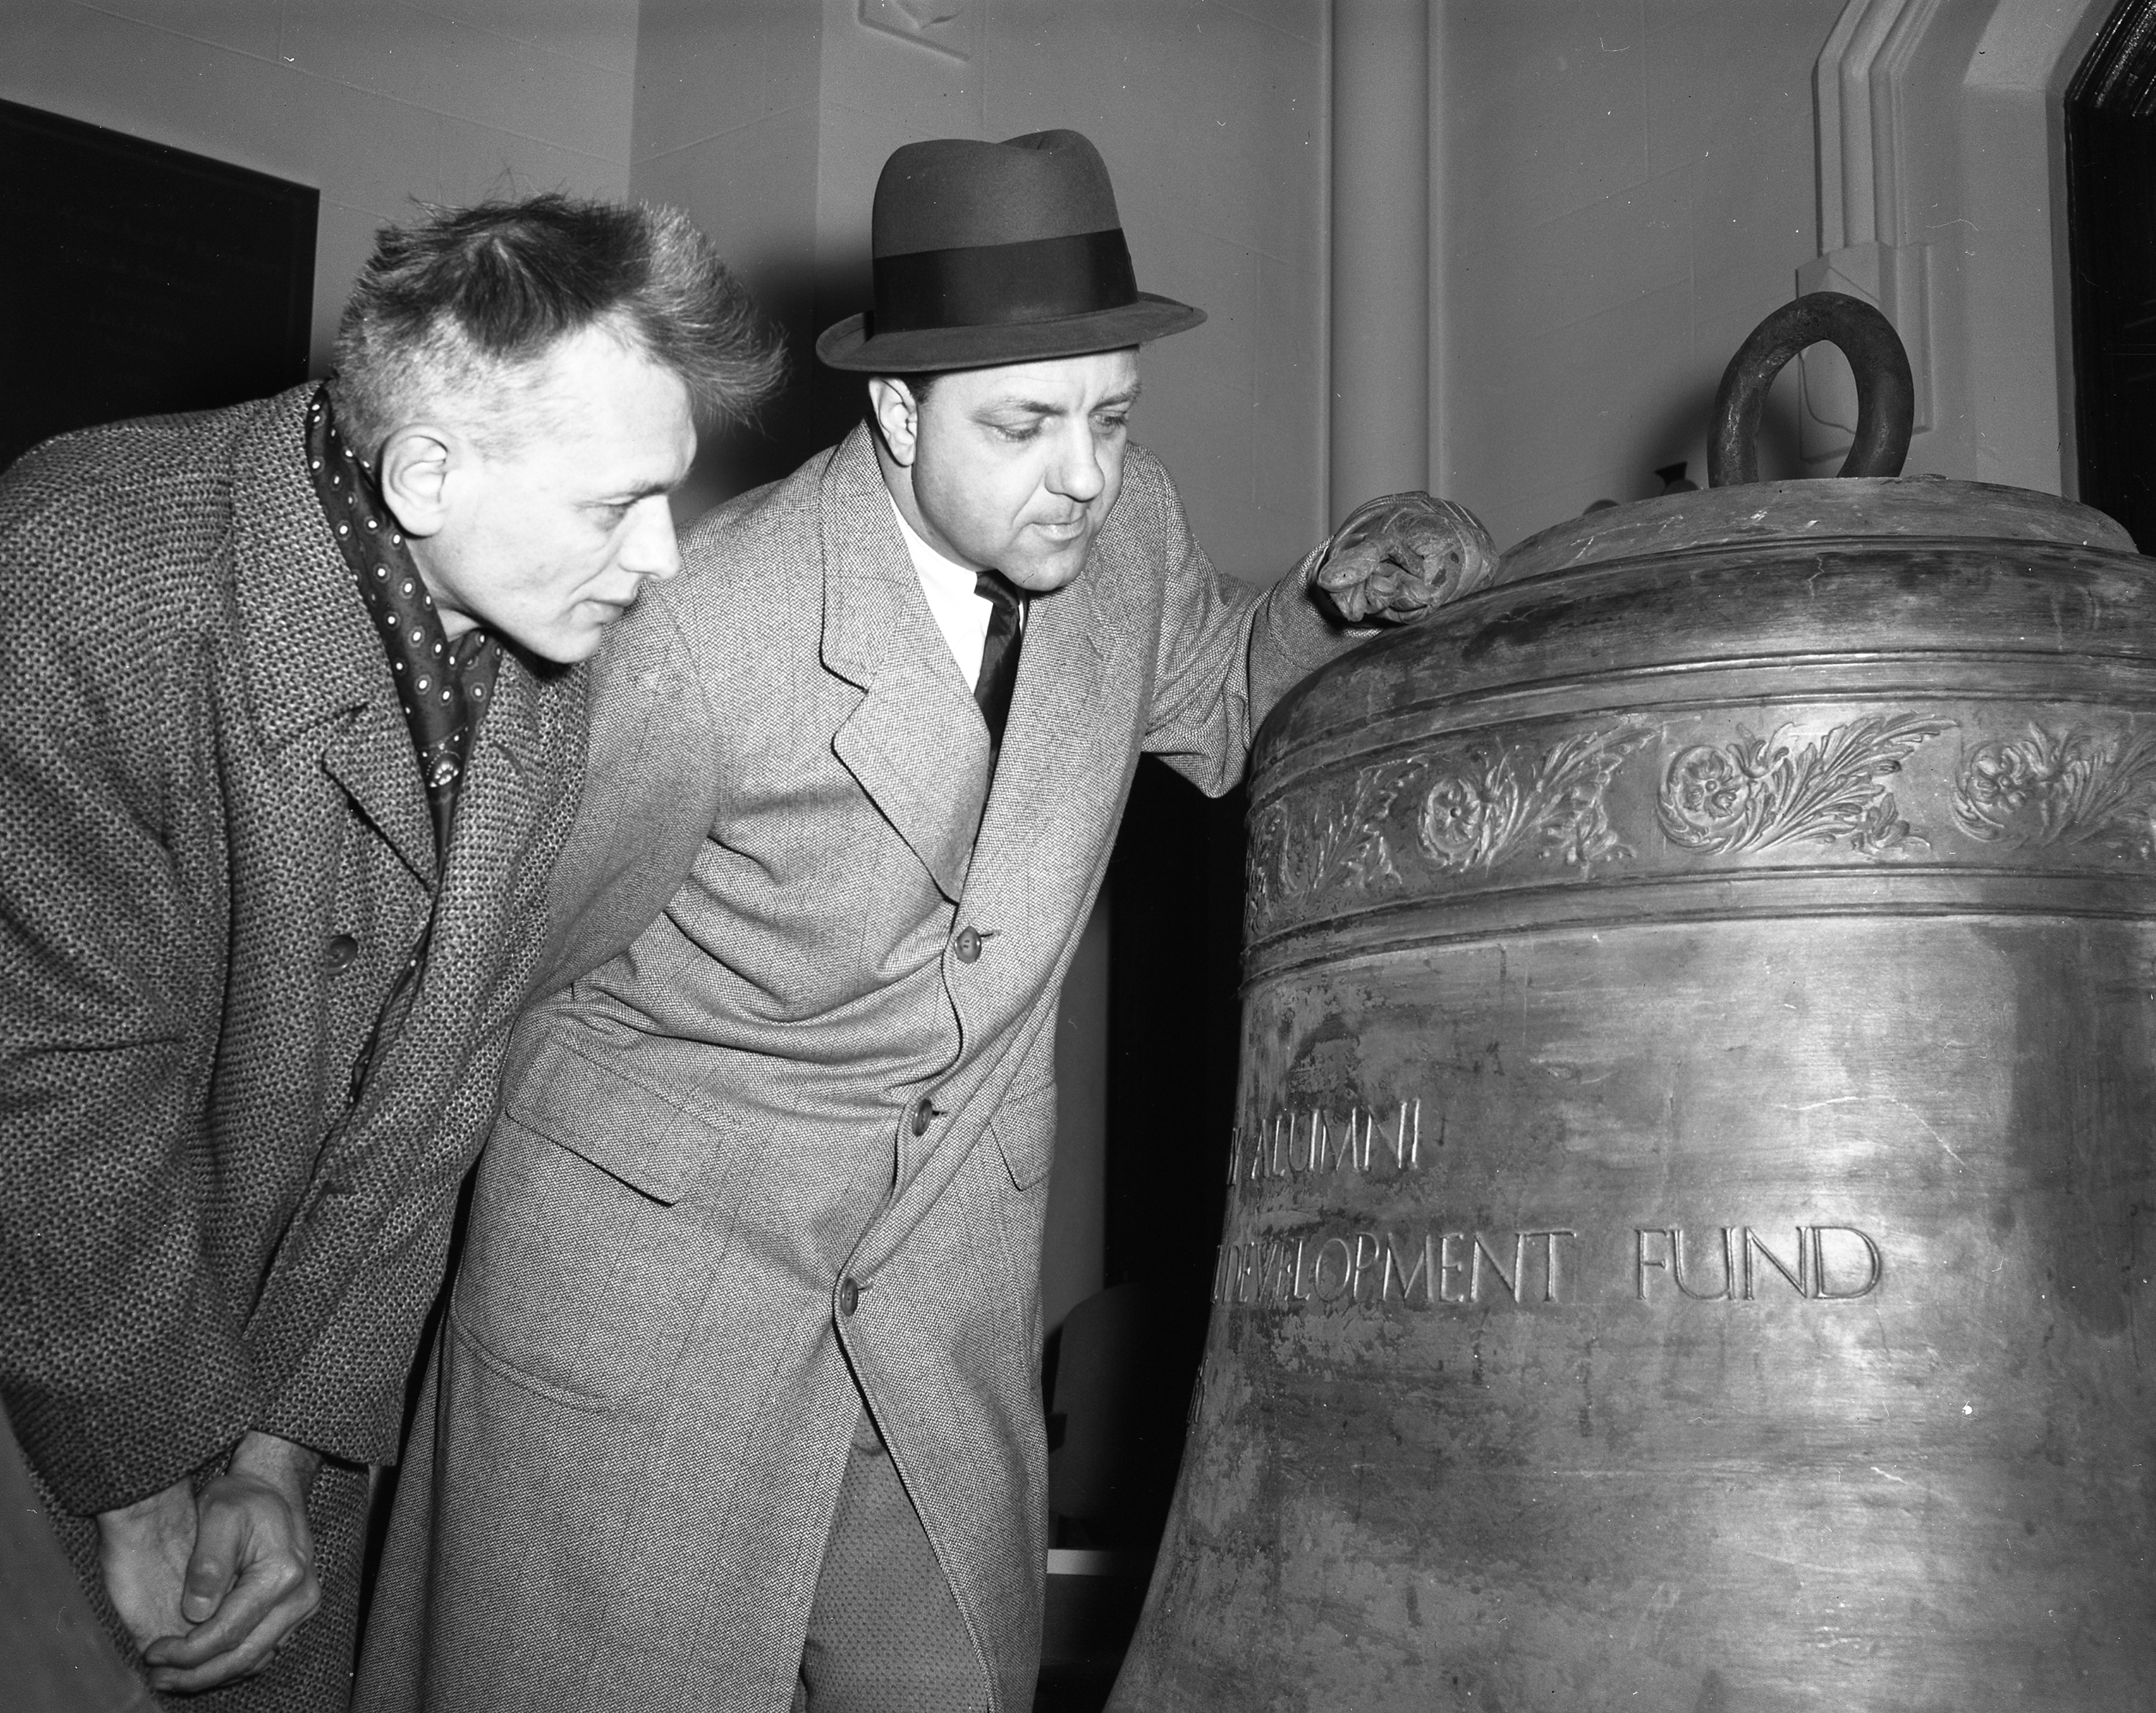 Inspection of a bell; January 6, 1959